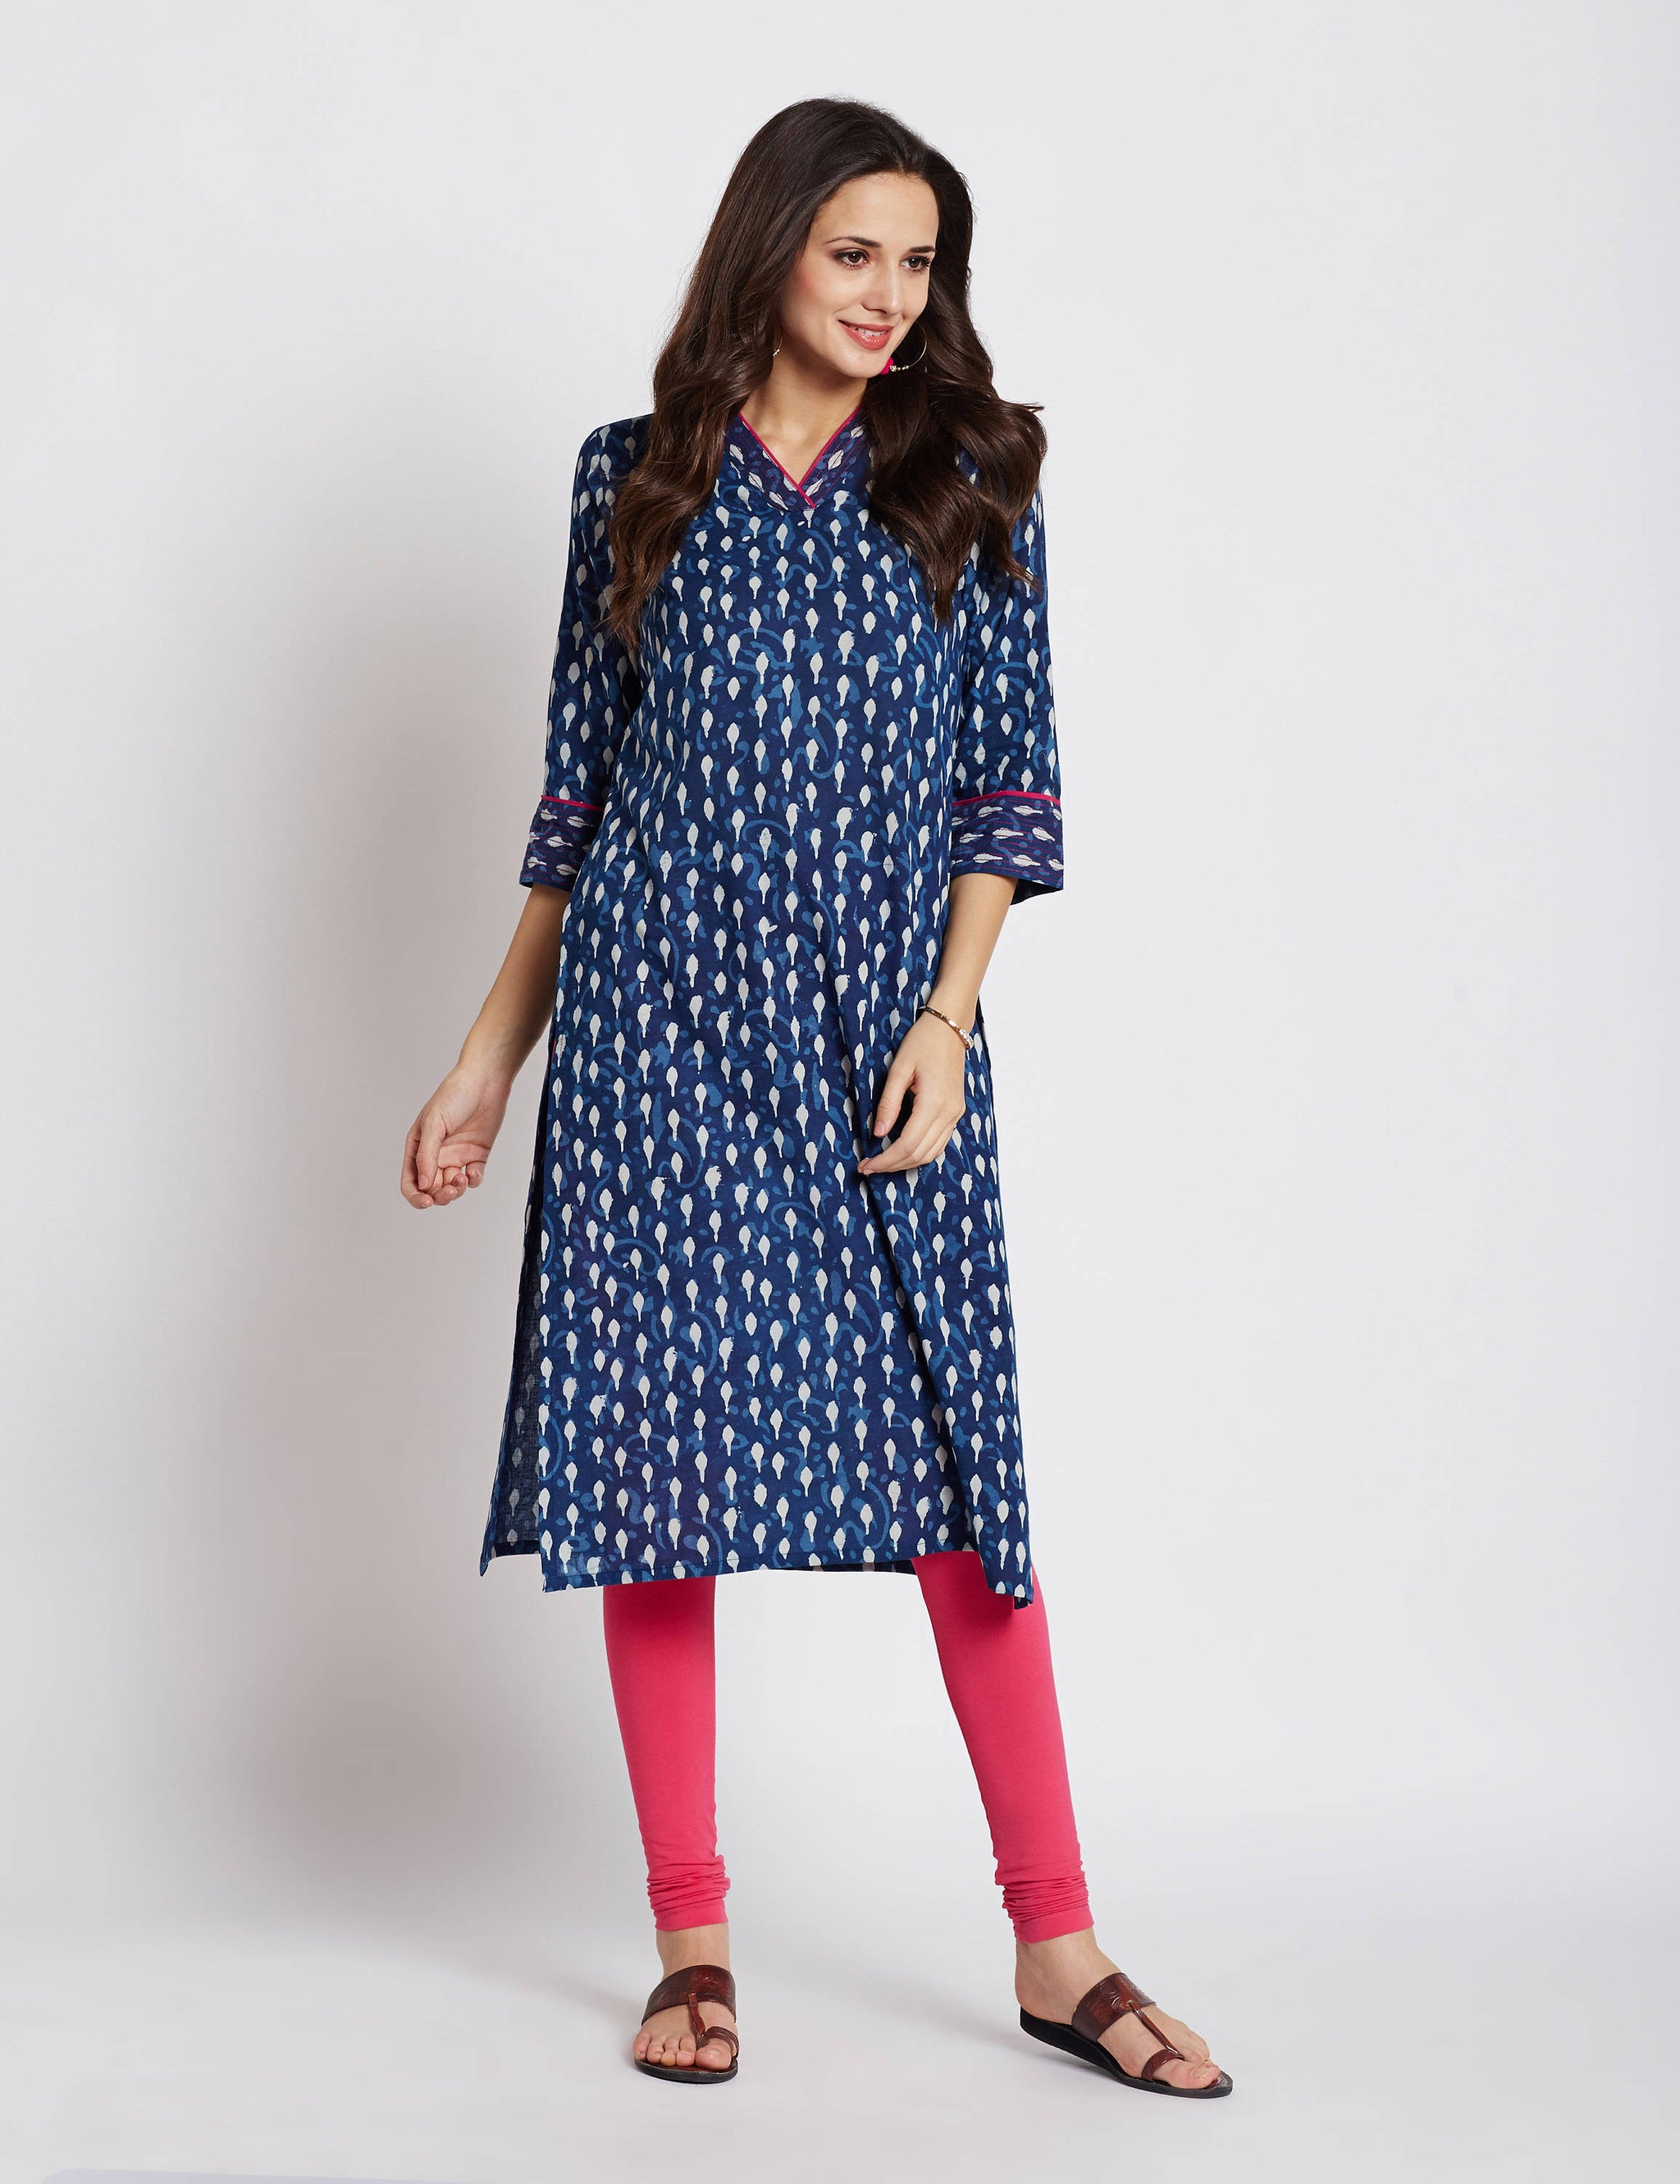 Indigo Hand block dabu printed ethnic long Indian kurta with contrast trims and hot pink hand embroidery on V neck and sleeves